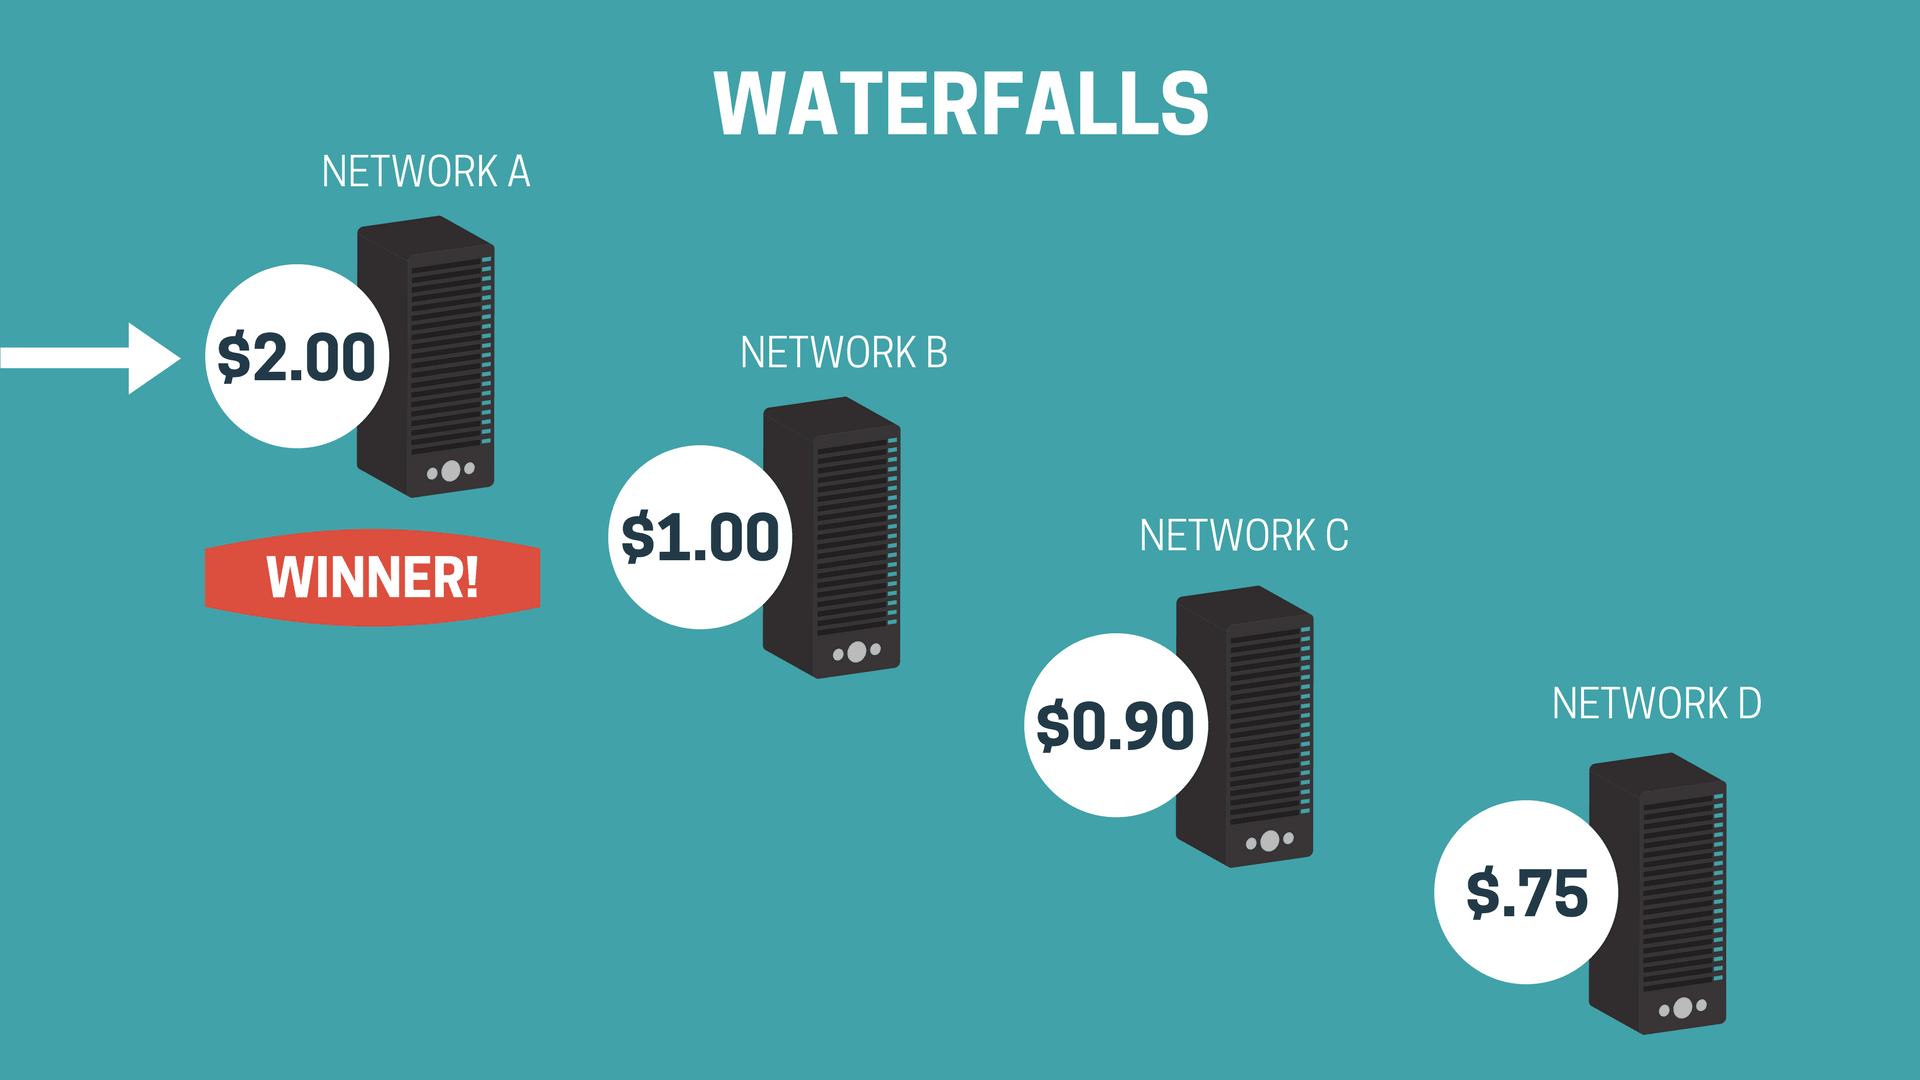 A waterfalls infographic displaying our networks (A, B, C and D), all labeled with a different price. Network A: $2, Network B: $1, Network C: $.90, and Network D: $.75. Network A is marked with a poppy colored "Winner!" label.